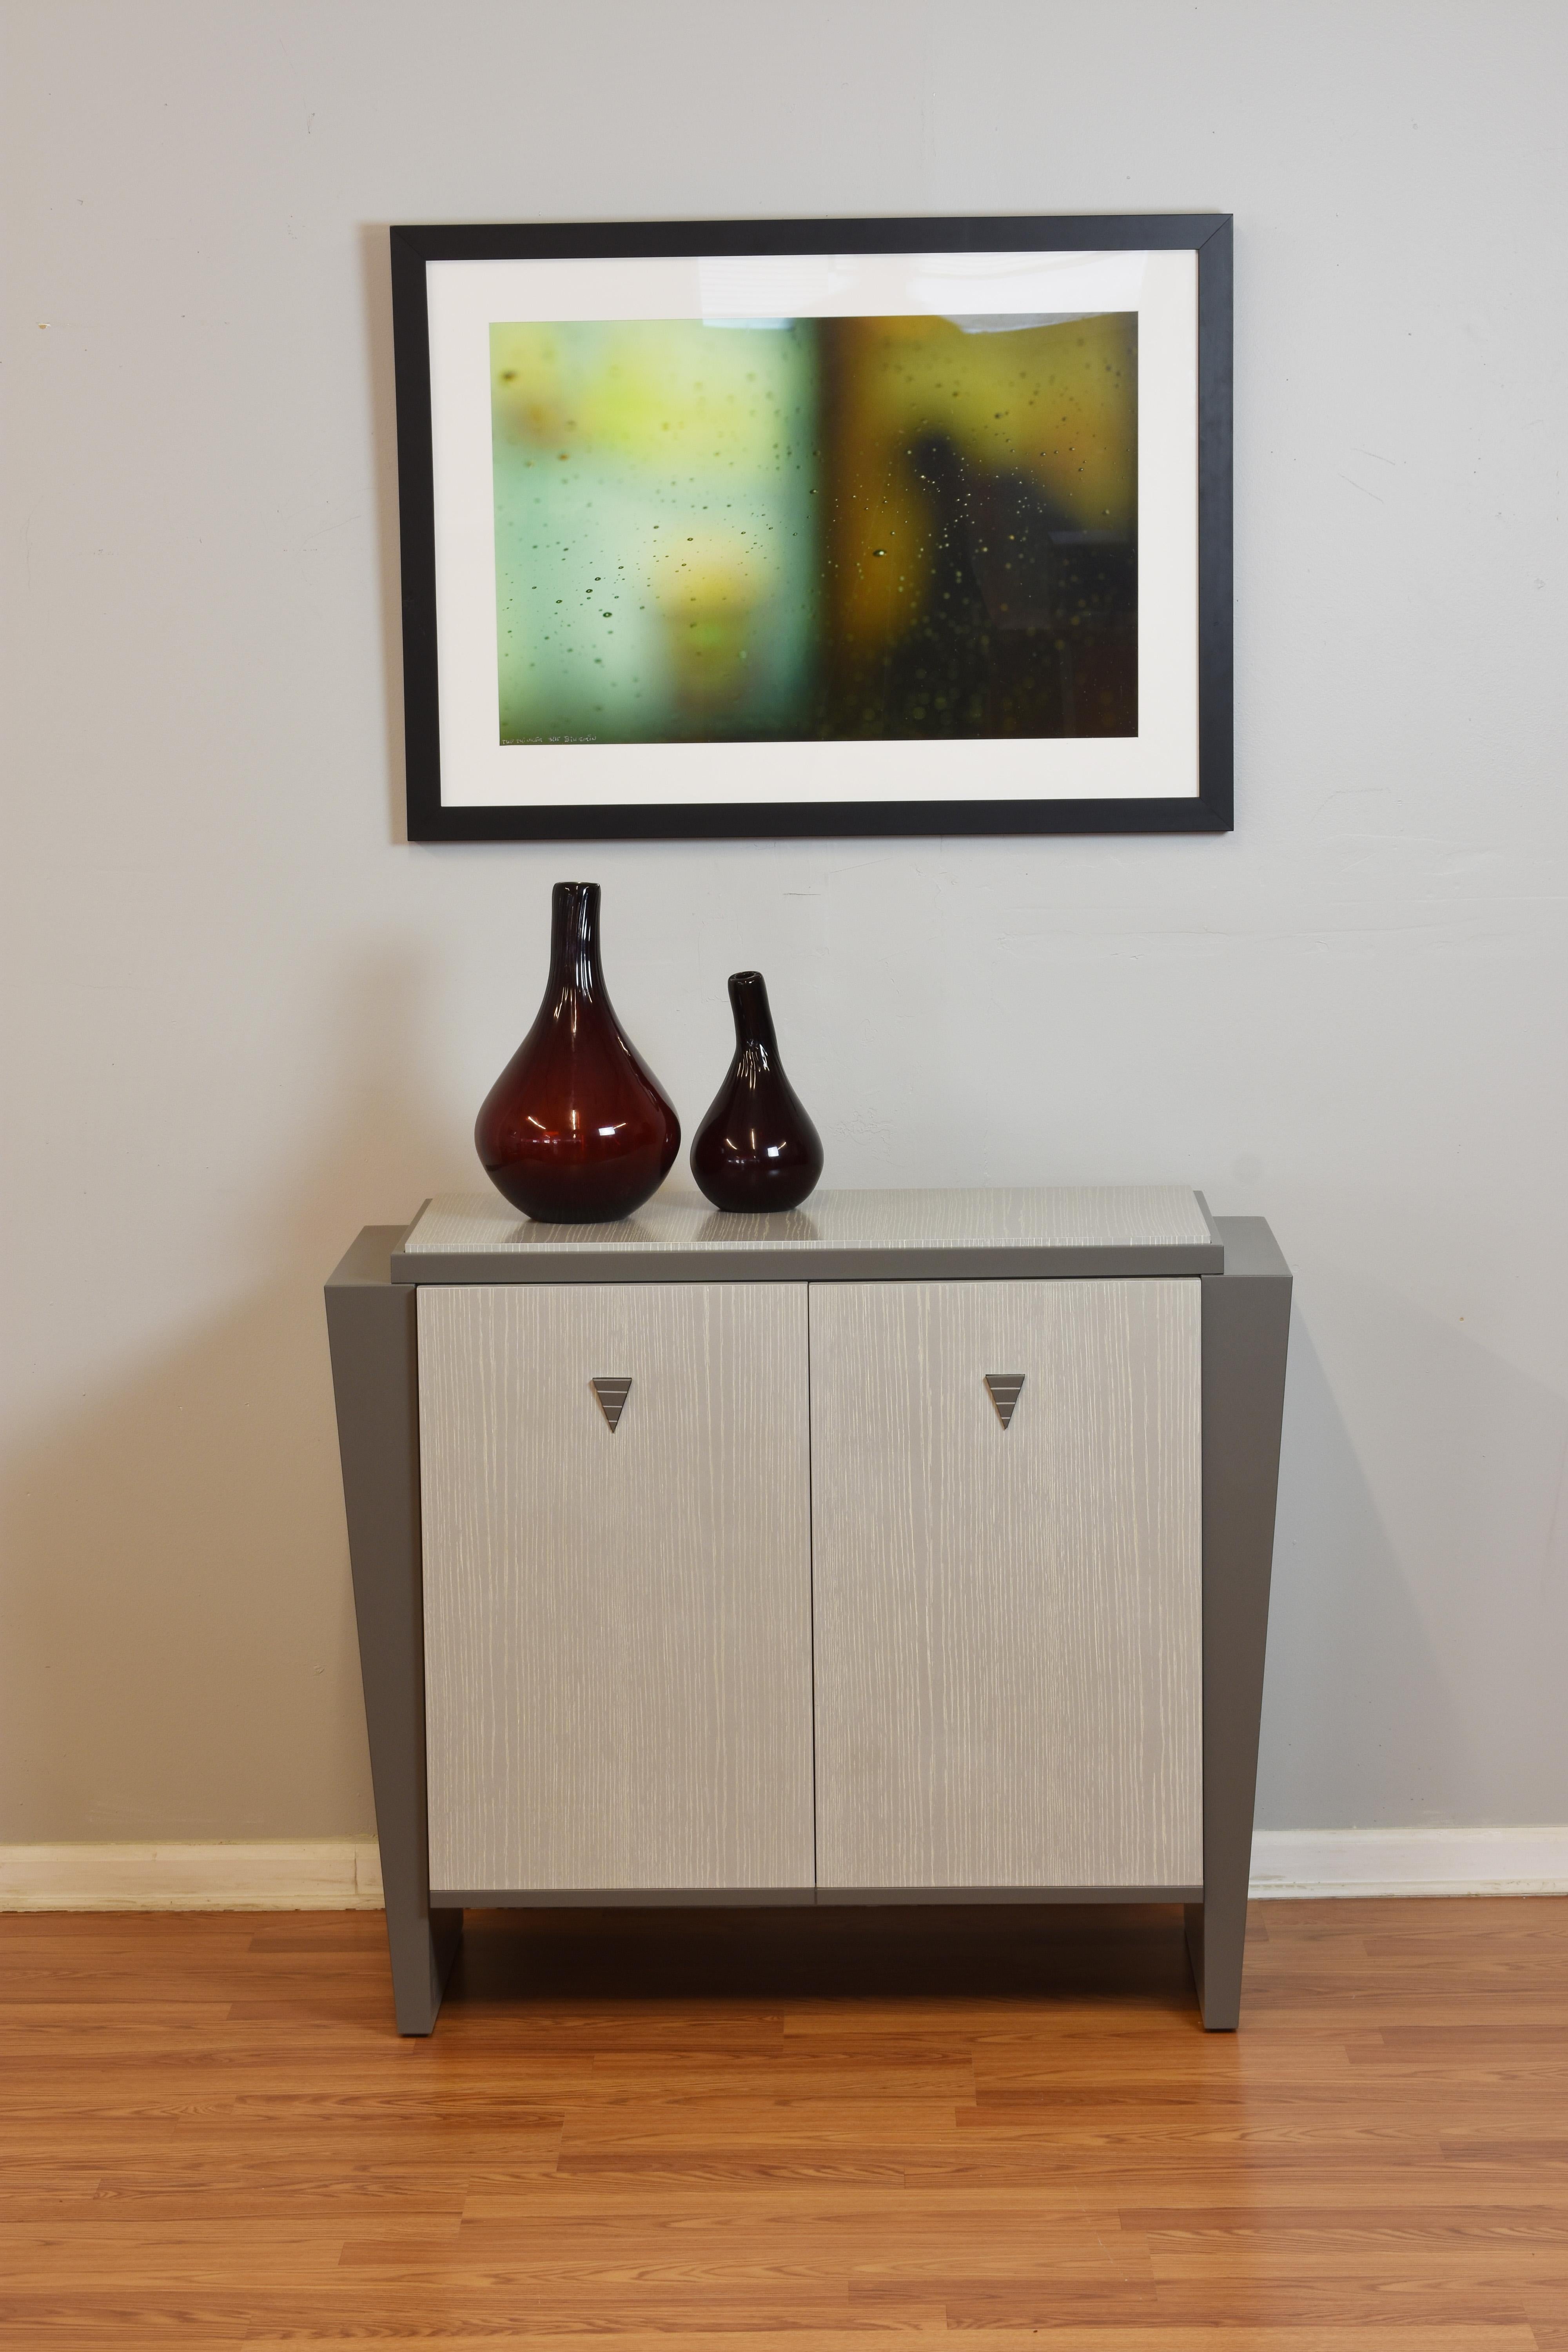 This Diva buffet and storage accent cabinet is shown with Cerused Facade and top with grey lacquered legs and detailing. It has two silverware drawers lined with anti tarnish felt lineer. Adjustable shelves.

All our work is signed and dated and